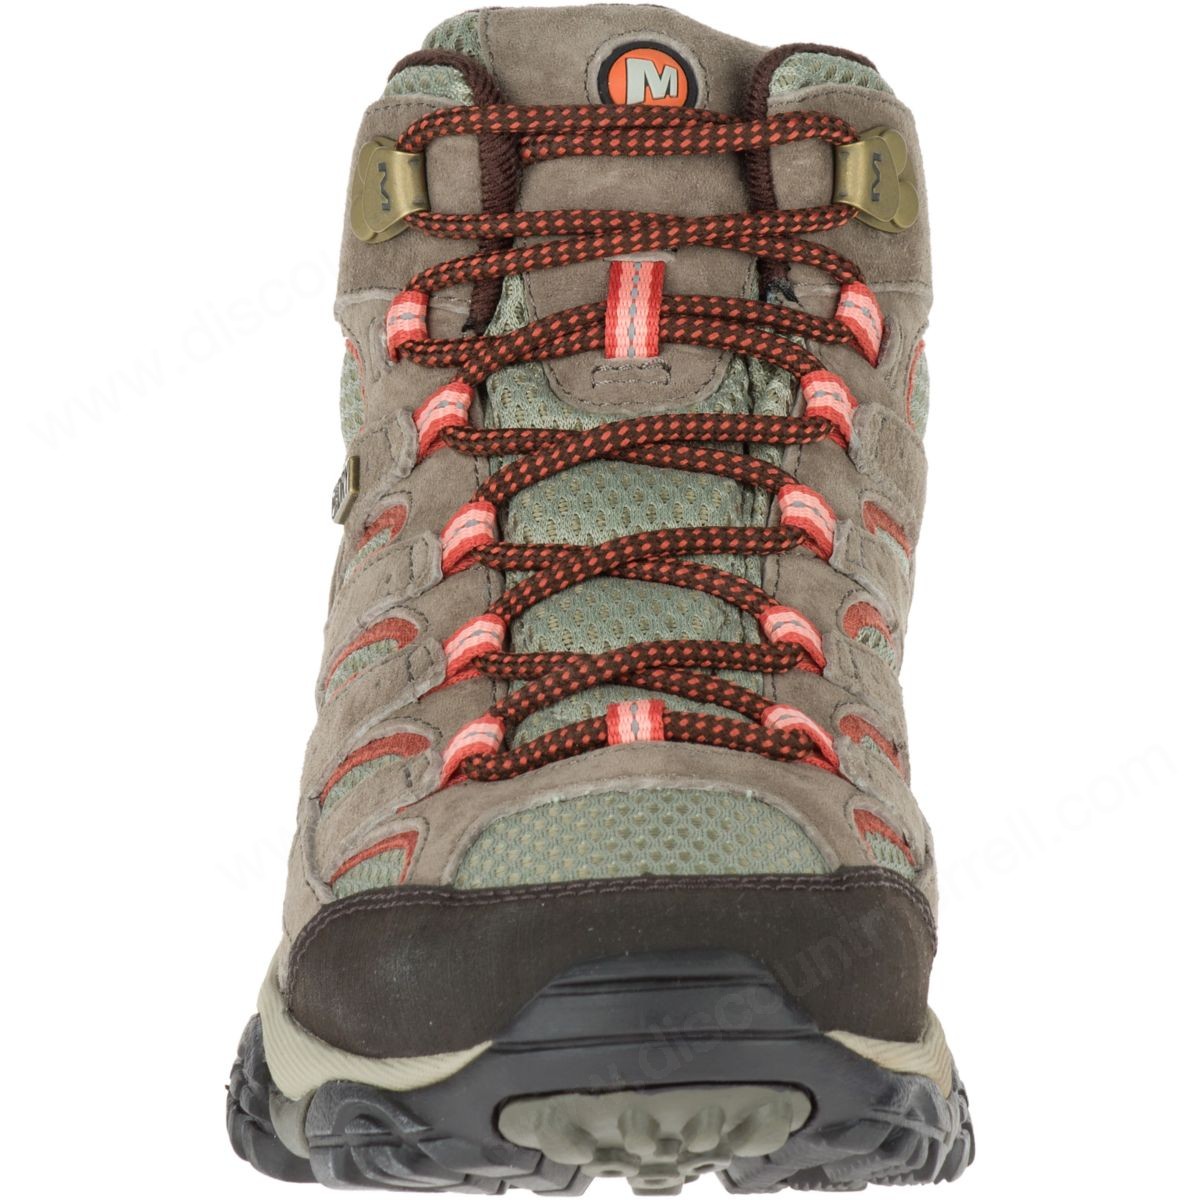 Merrell Lady's Moab Mother Of All Boots™ Mid Waterproof Wide Width Bungee Cord - -4